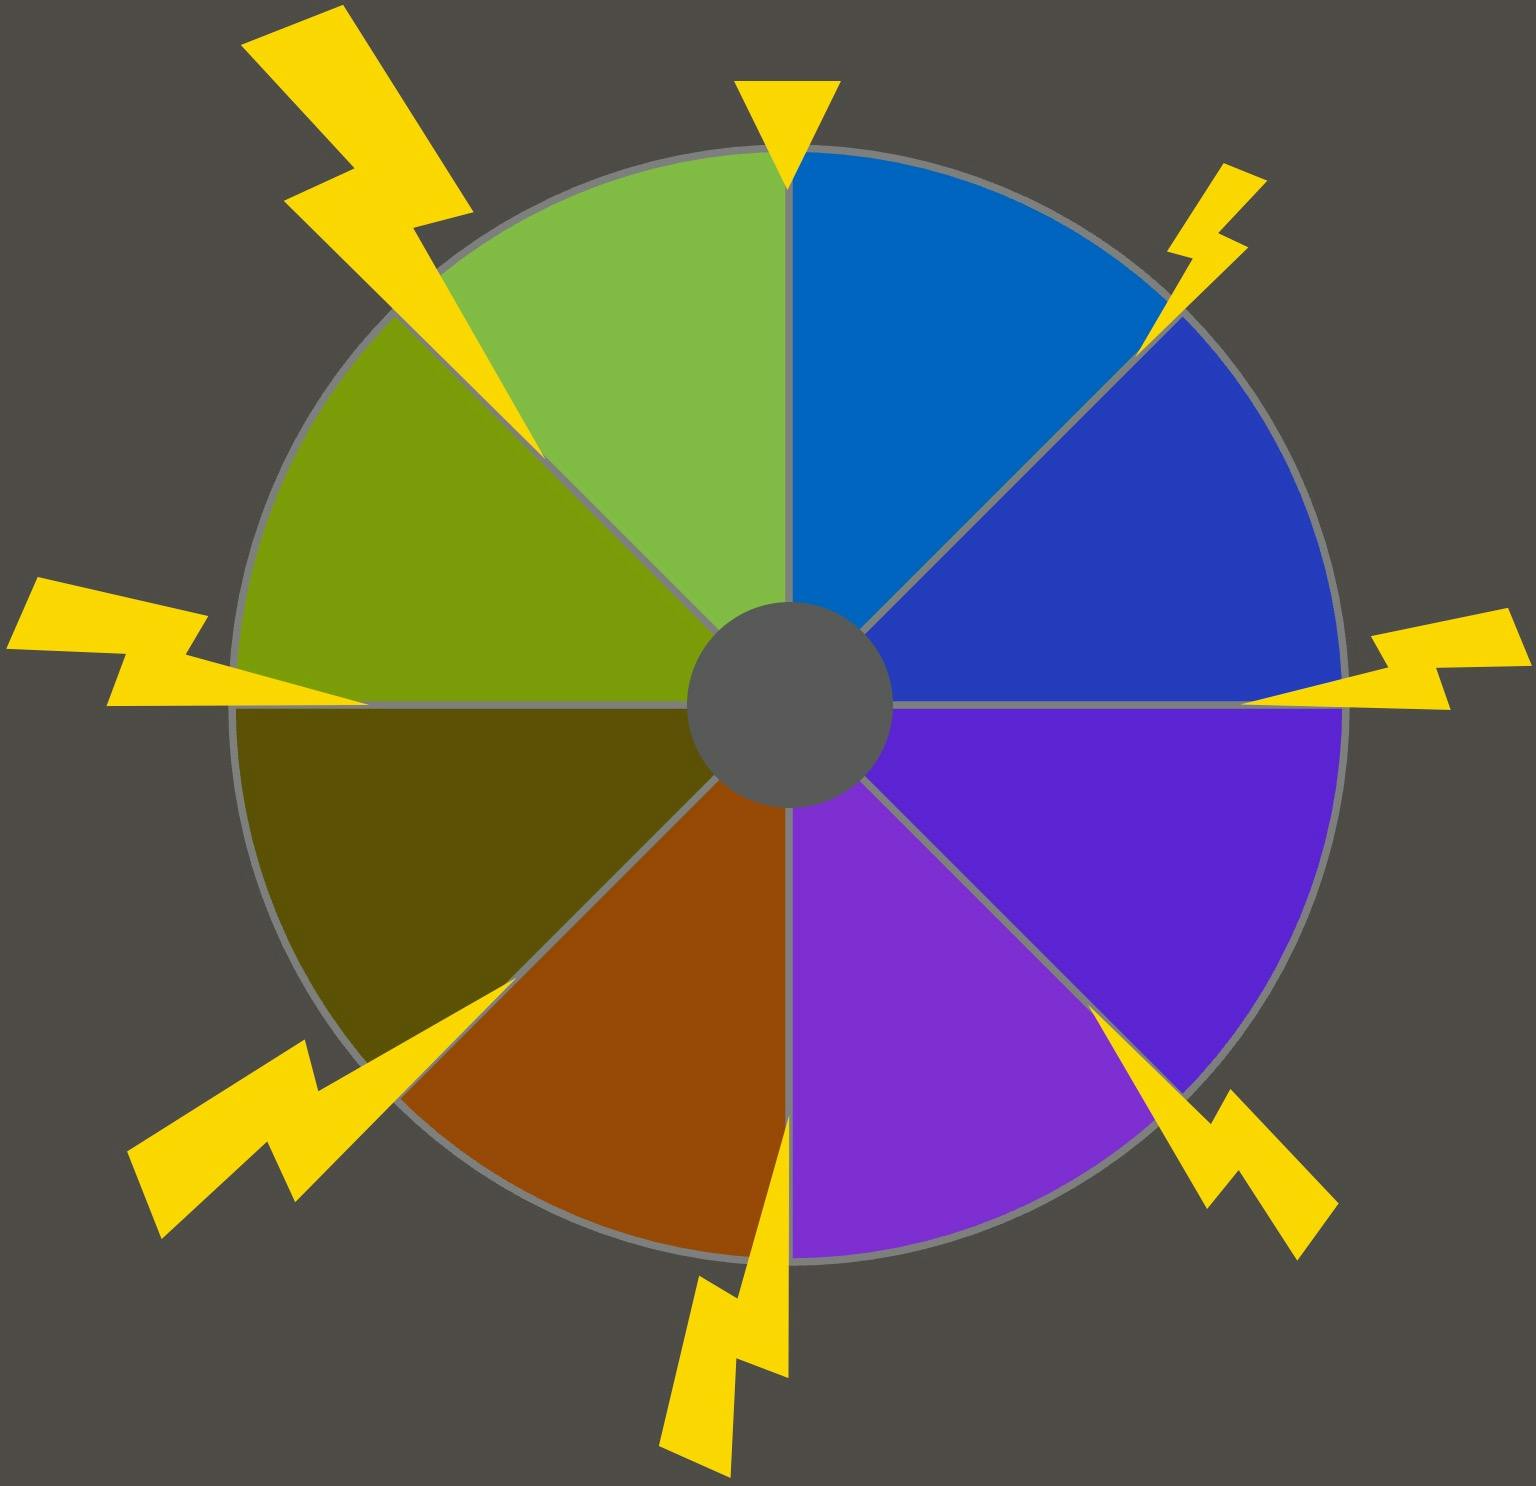 Circle with 8 segments (like a pizzia pia), with lightening bolts striking between each segment.